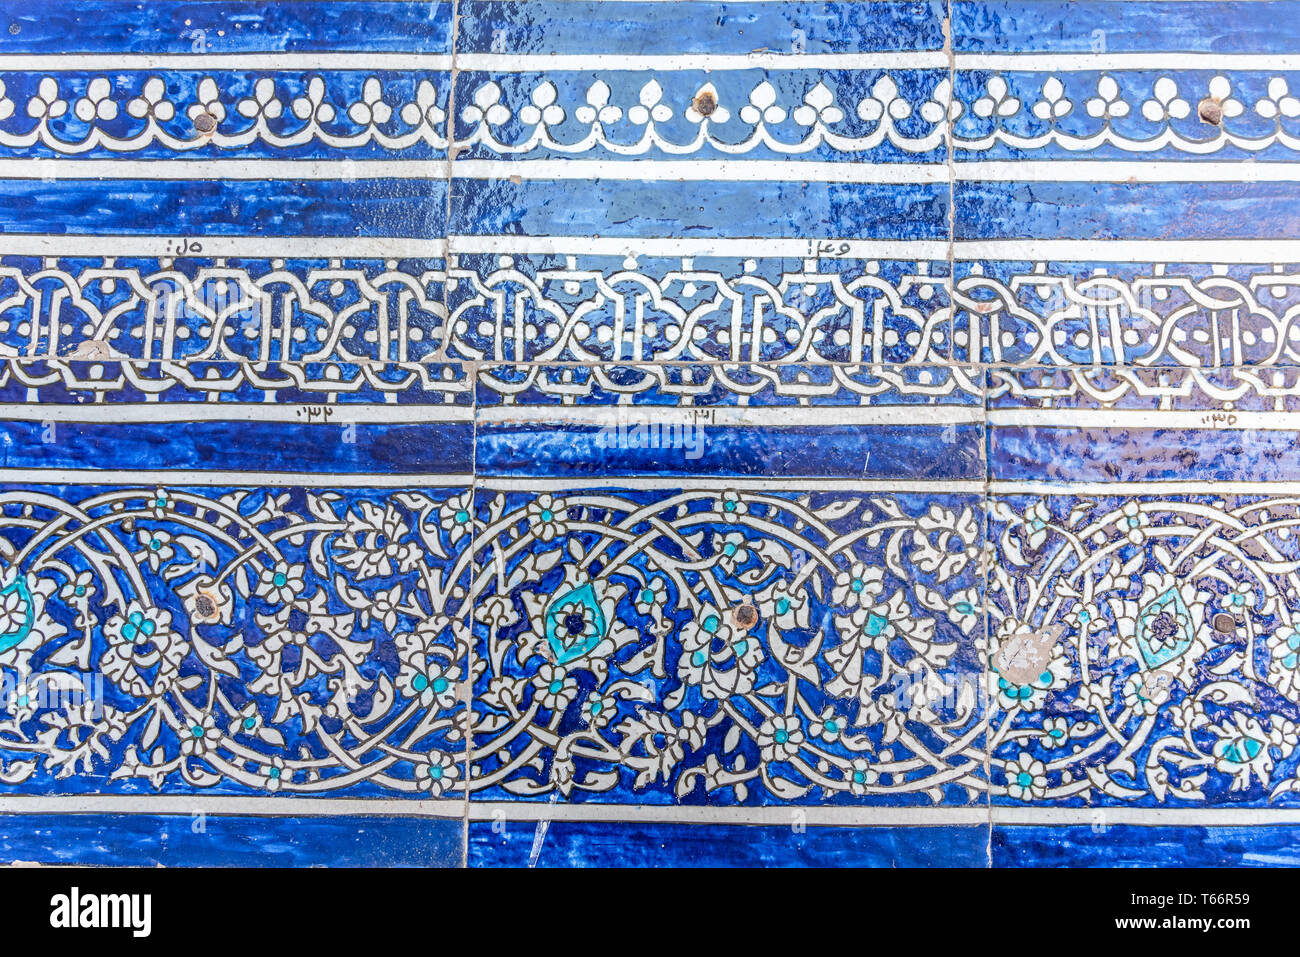 Details of glazed tiles in a mosque in Usbekistan. Stock Photo